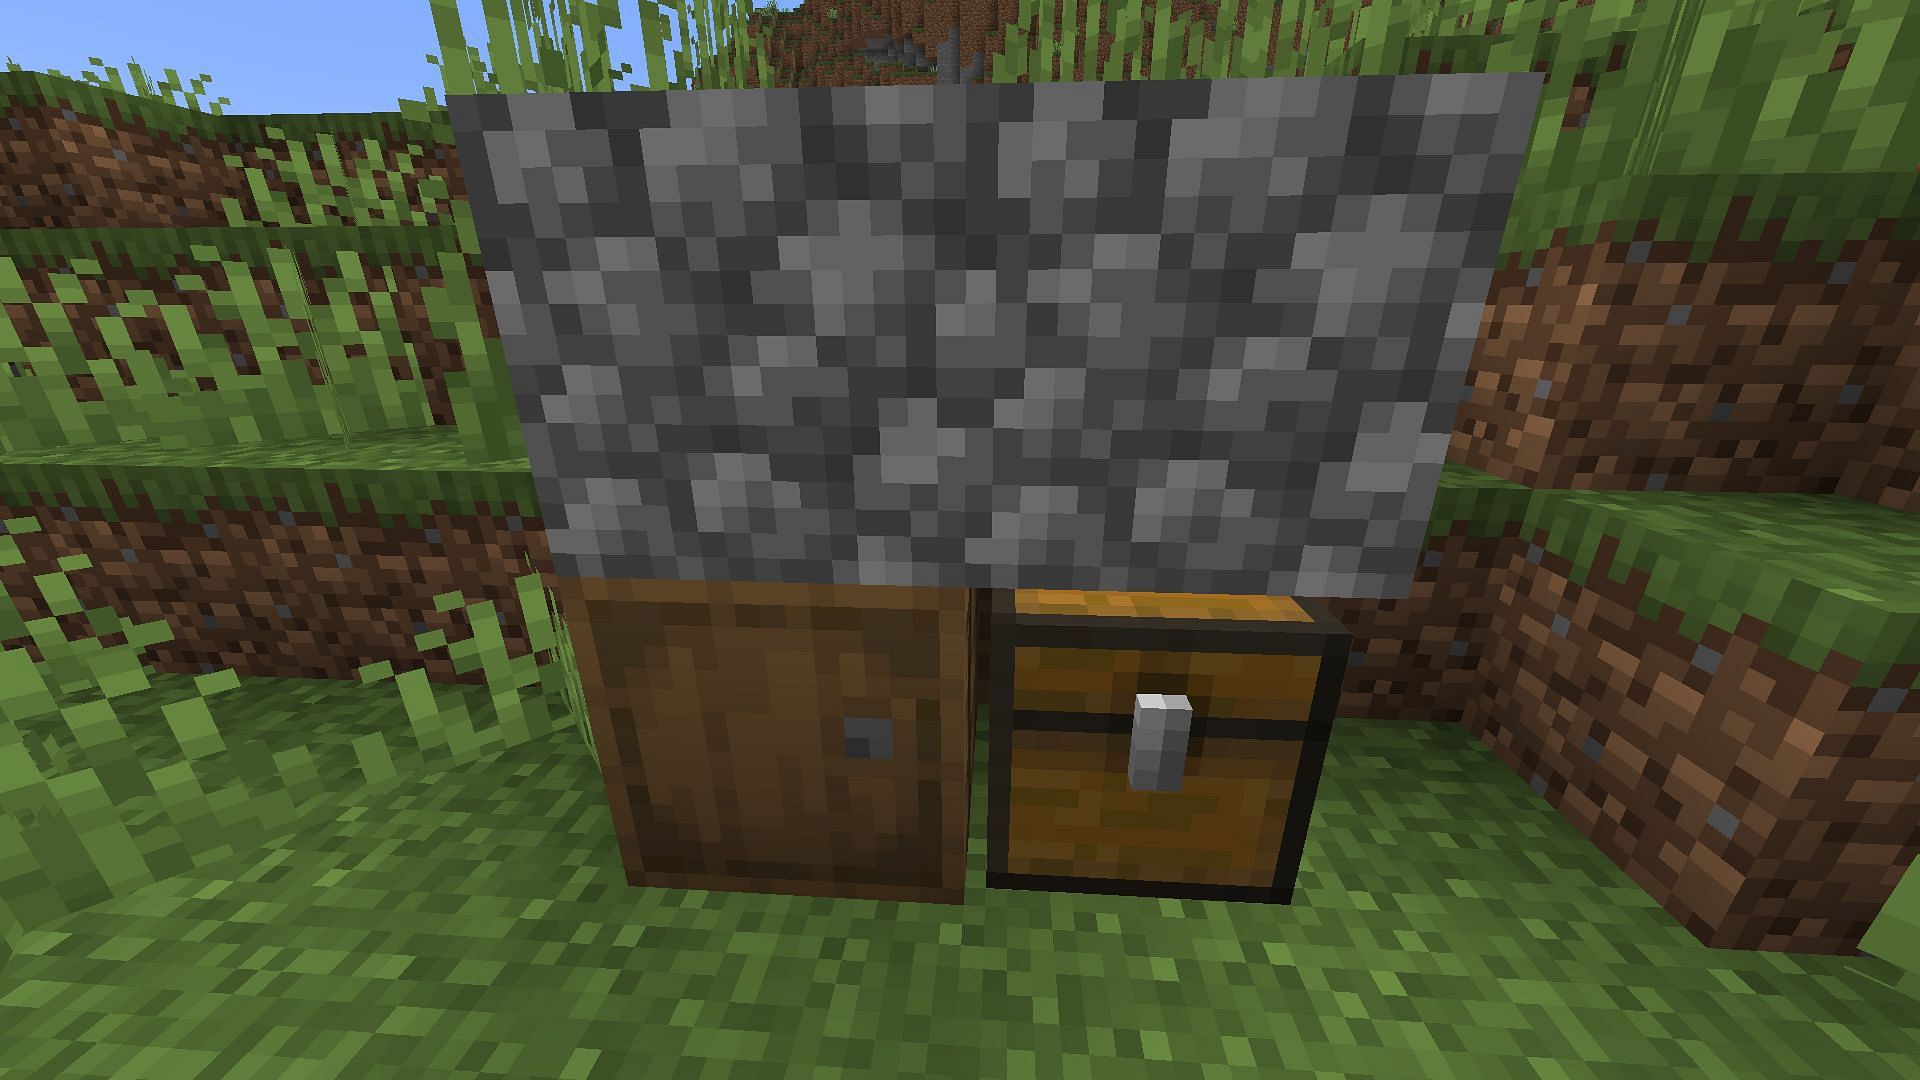 Barrels can be accessed even if there is a solid block right on top of it in Minecraft (Image via Mojang)